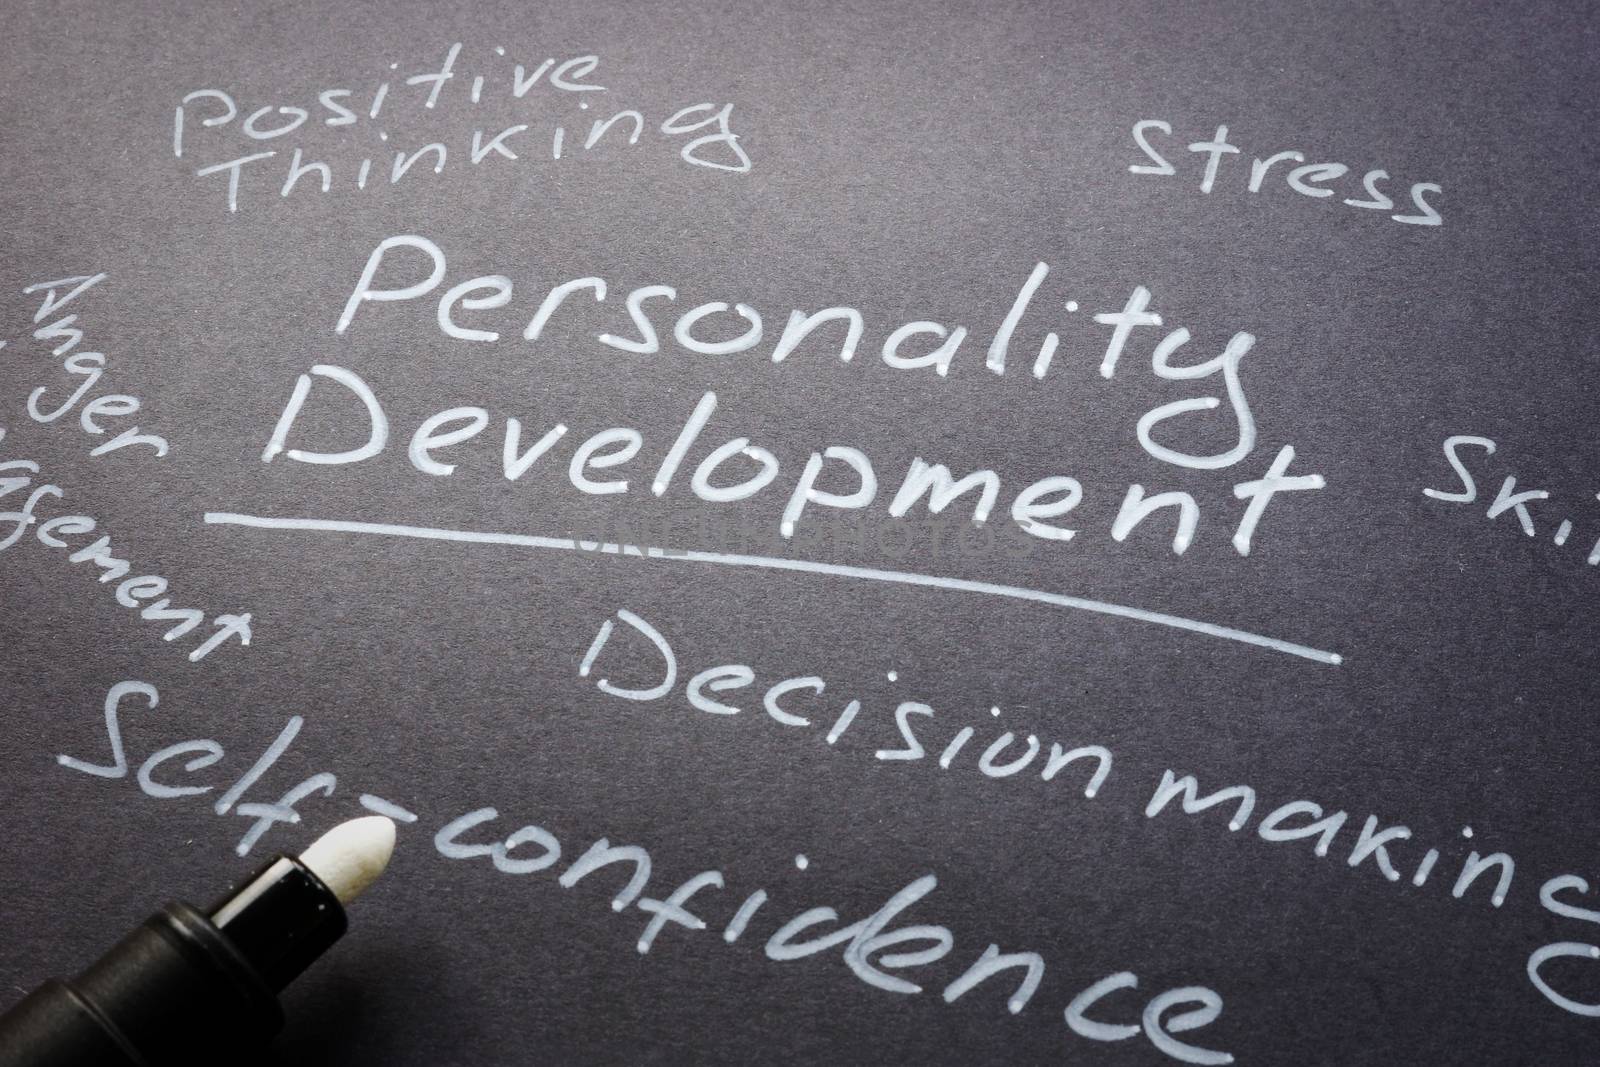 Personality Development and other signs on the paper.